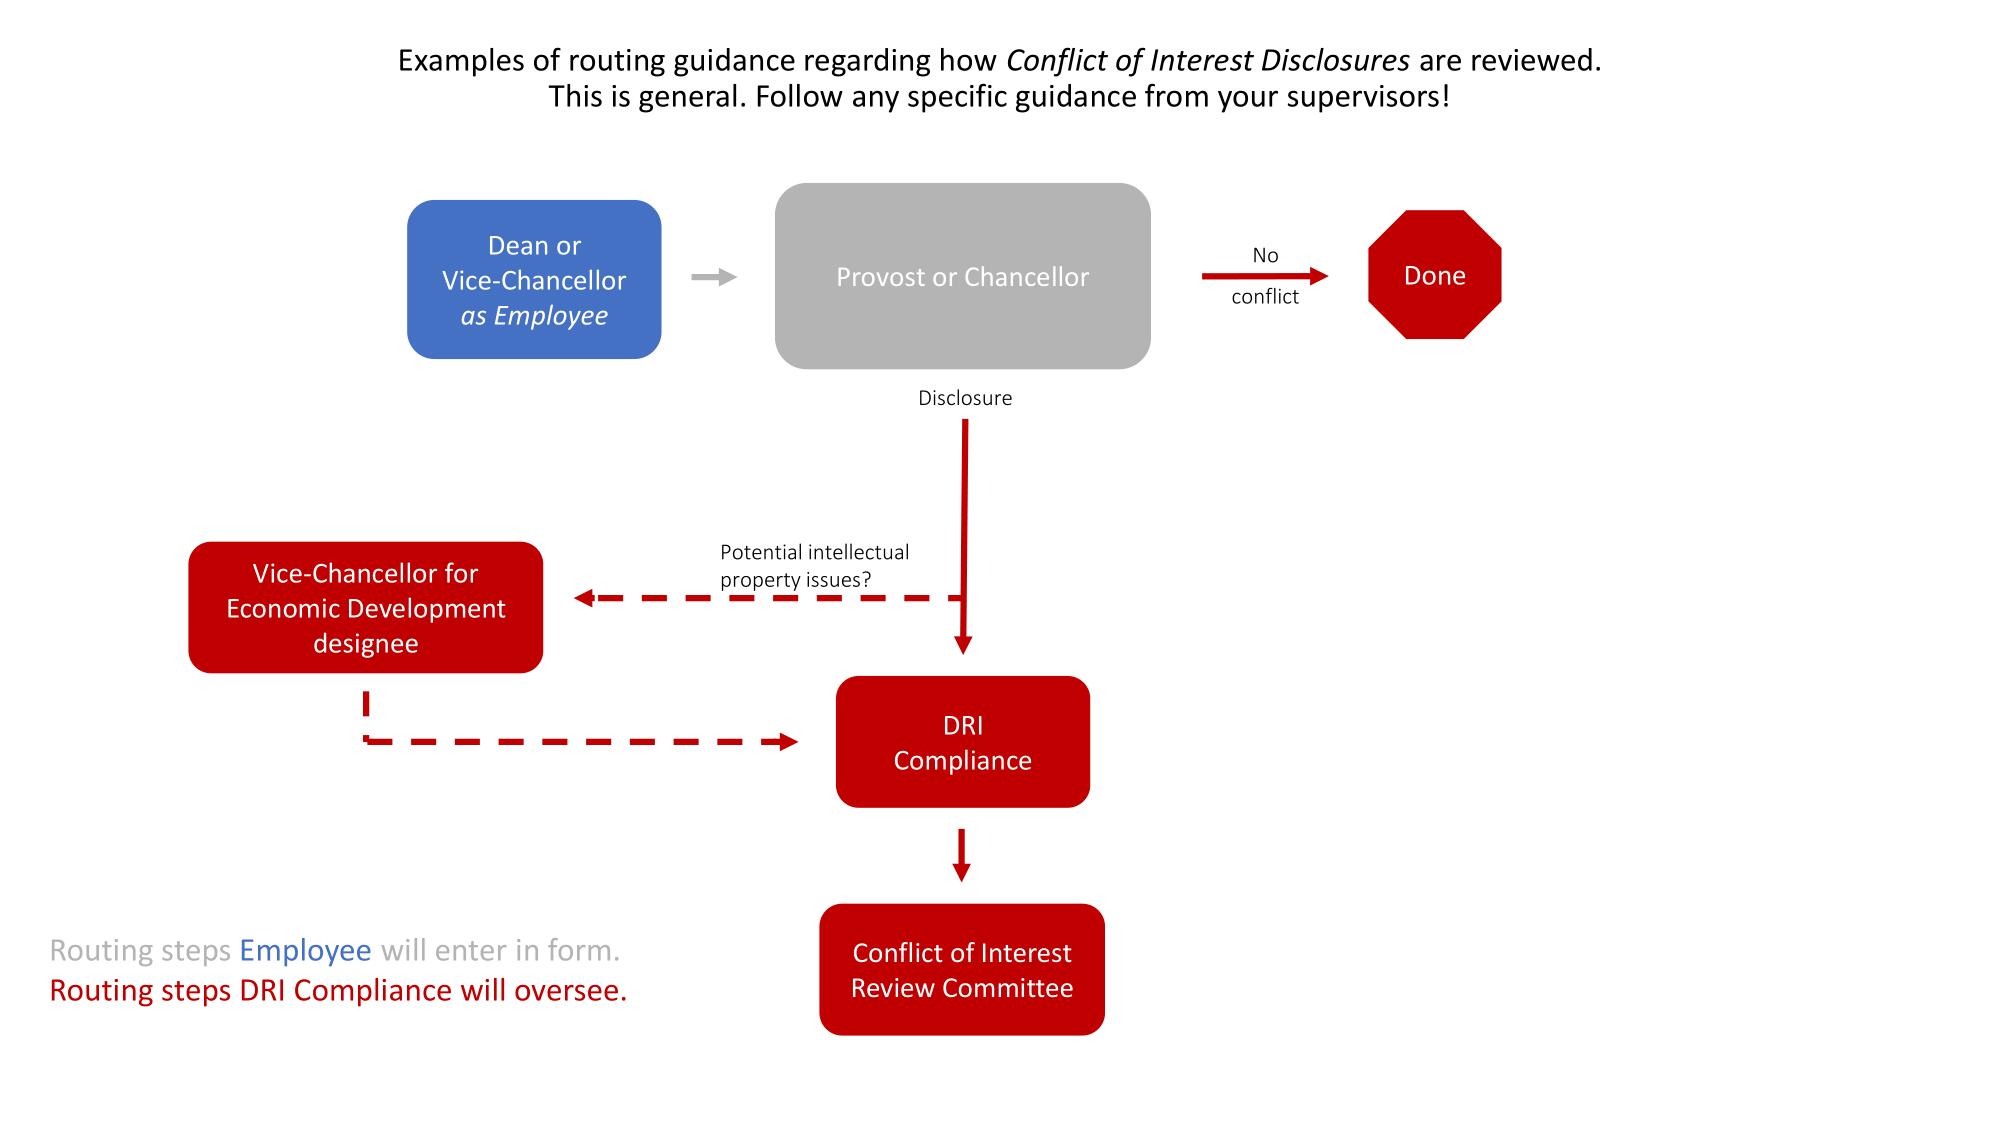 Examples of routing guidance for conflict of interest disclosures for dean or vc